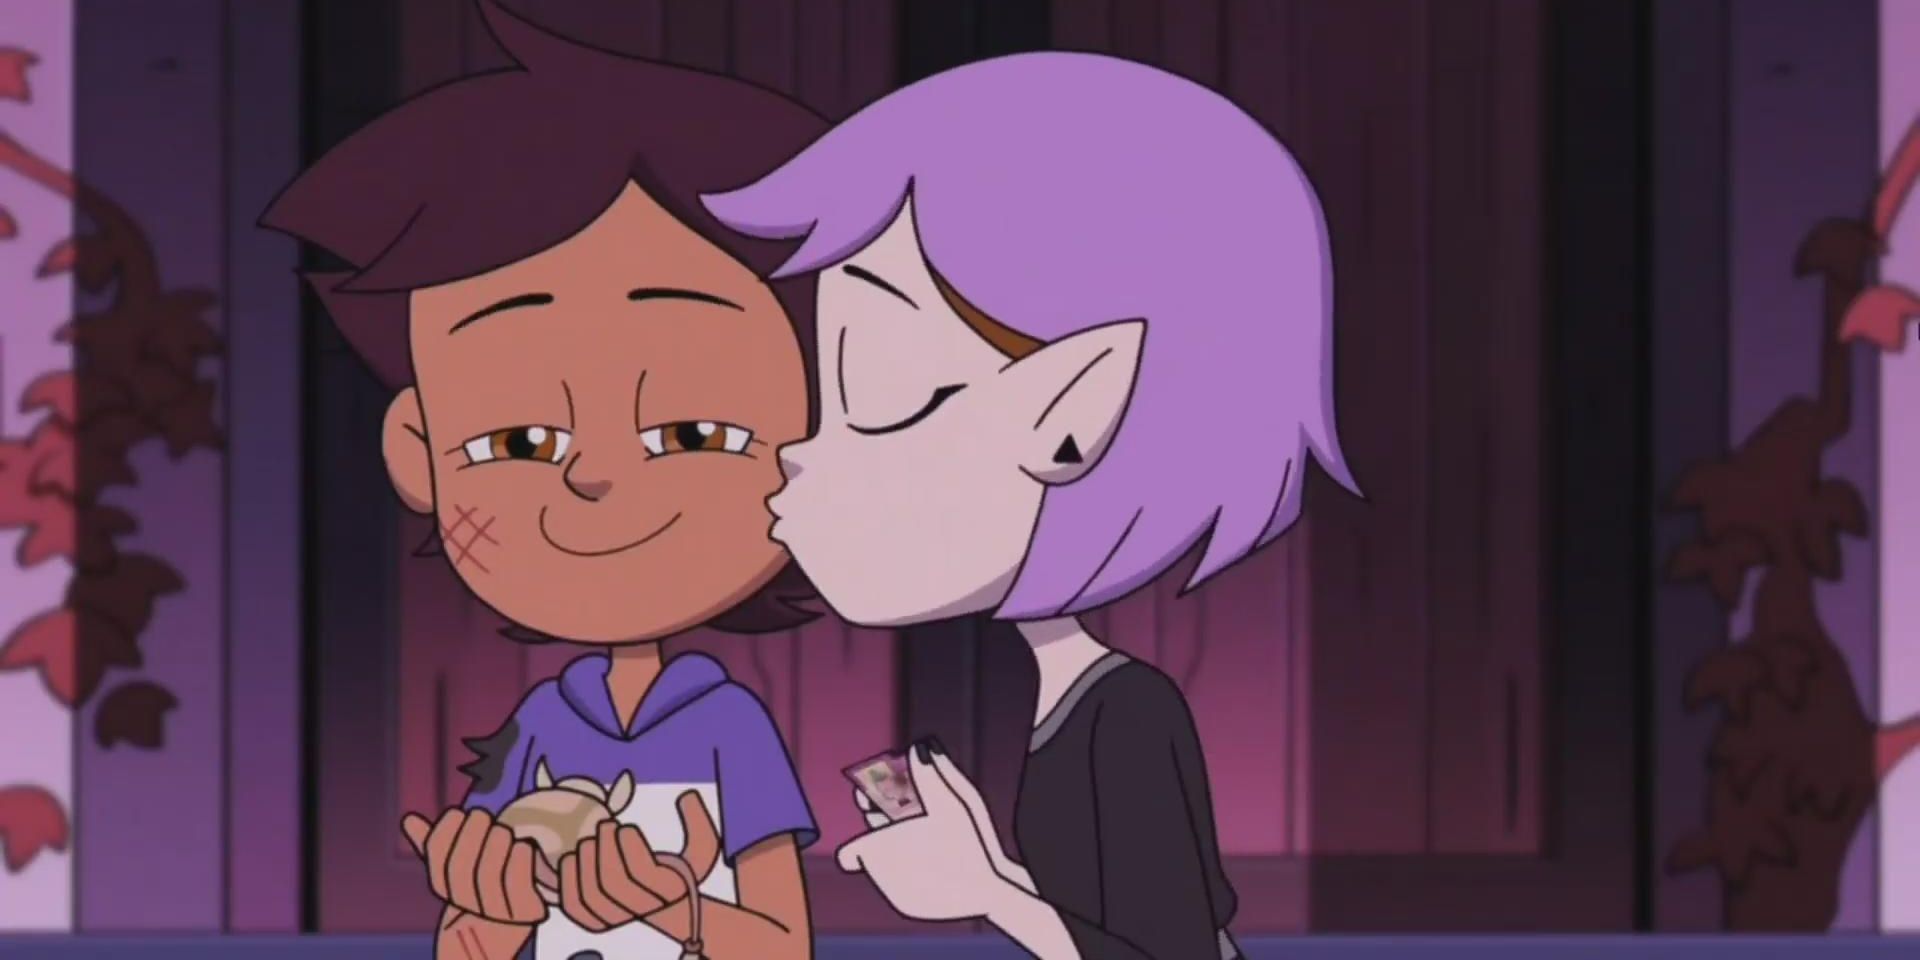 Image of Amity kissing Luz on the cheek in The Owl House